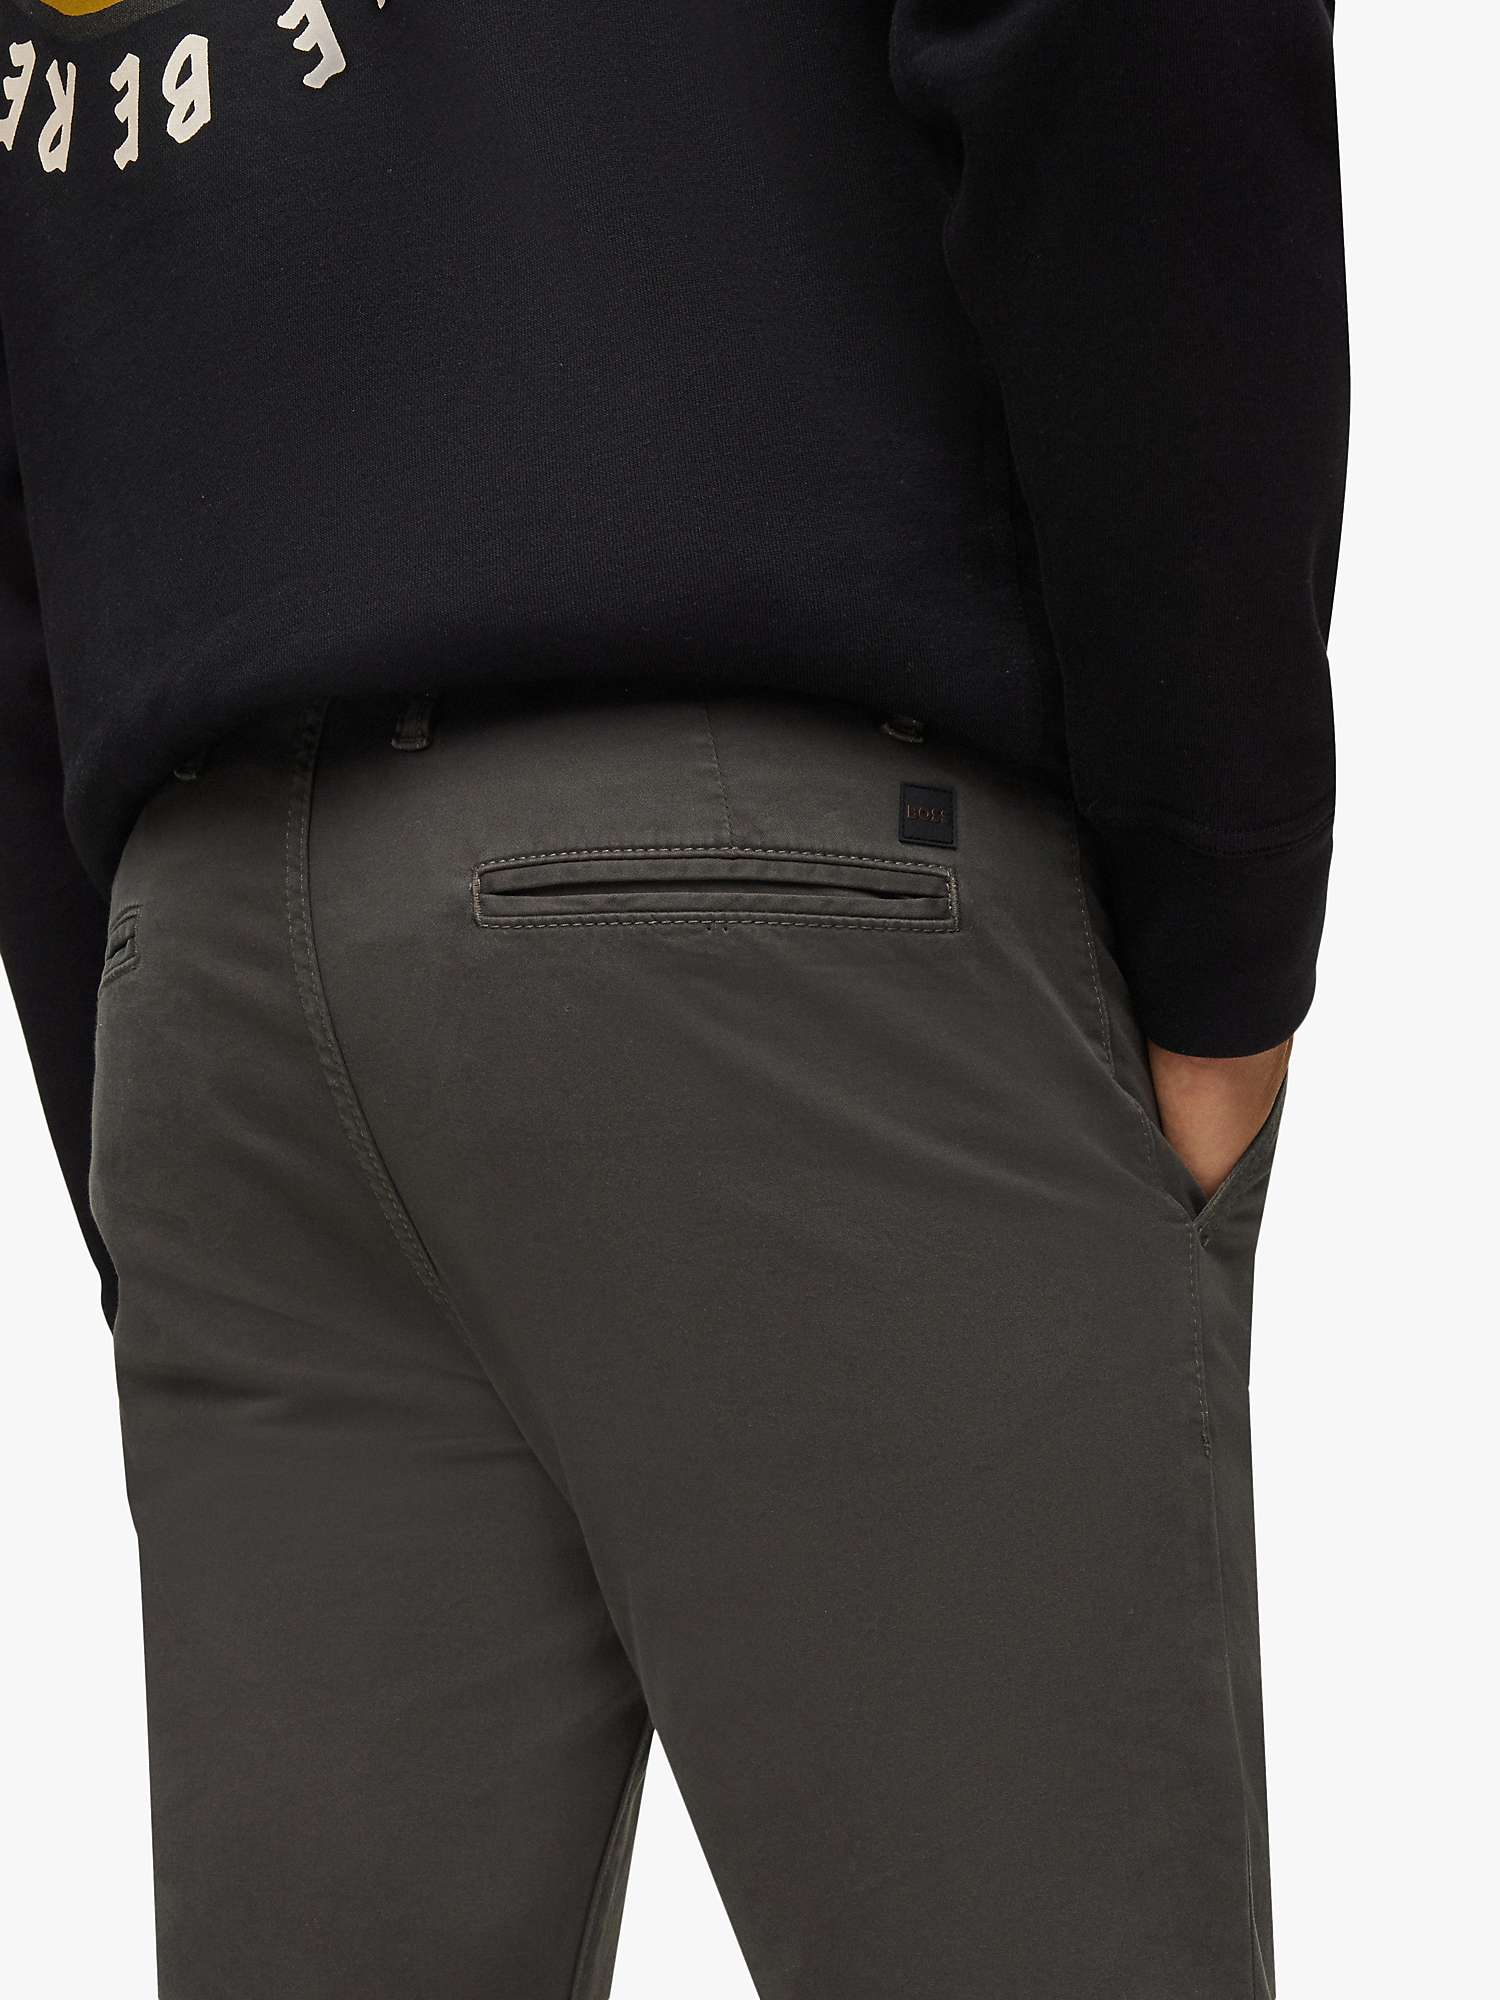 Buy BOSS Schino Taber Slim Chinos, Charcoal Online at johnlewis.com